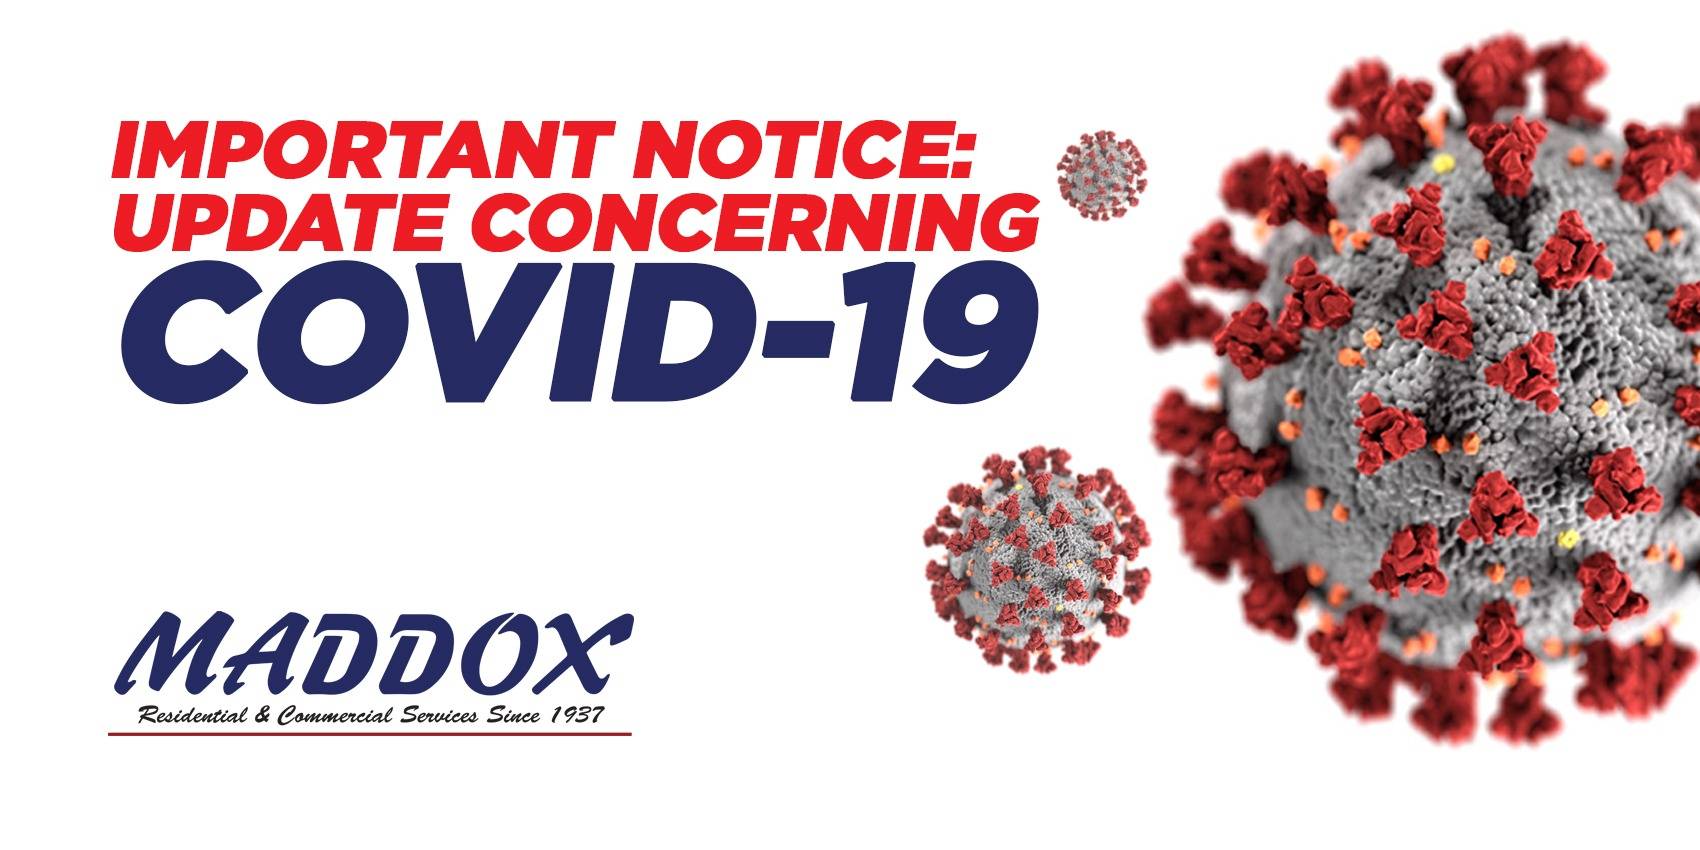 IMPORTANT NOTICE: UPDATE CONCERNING COVID-19